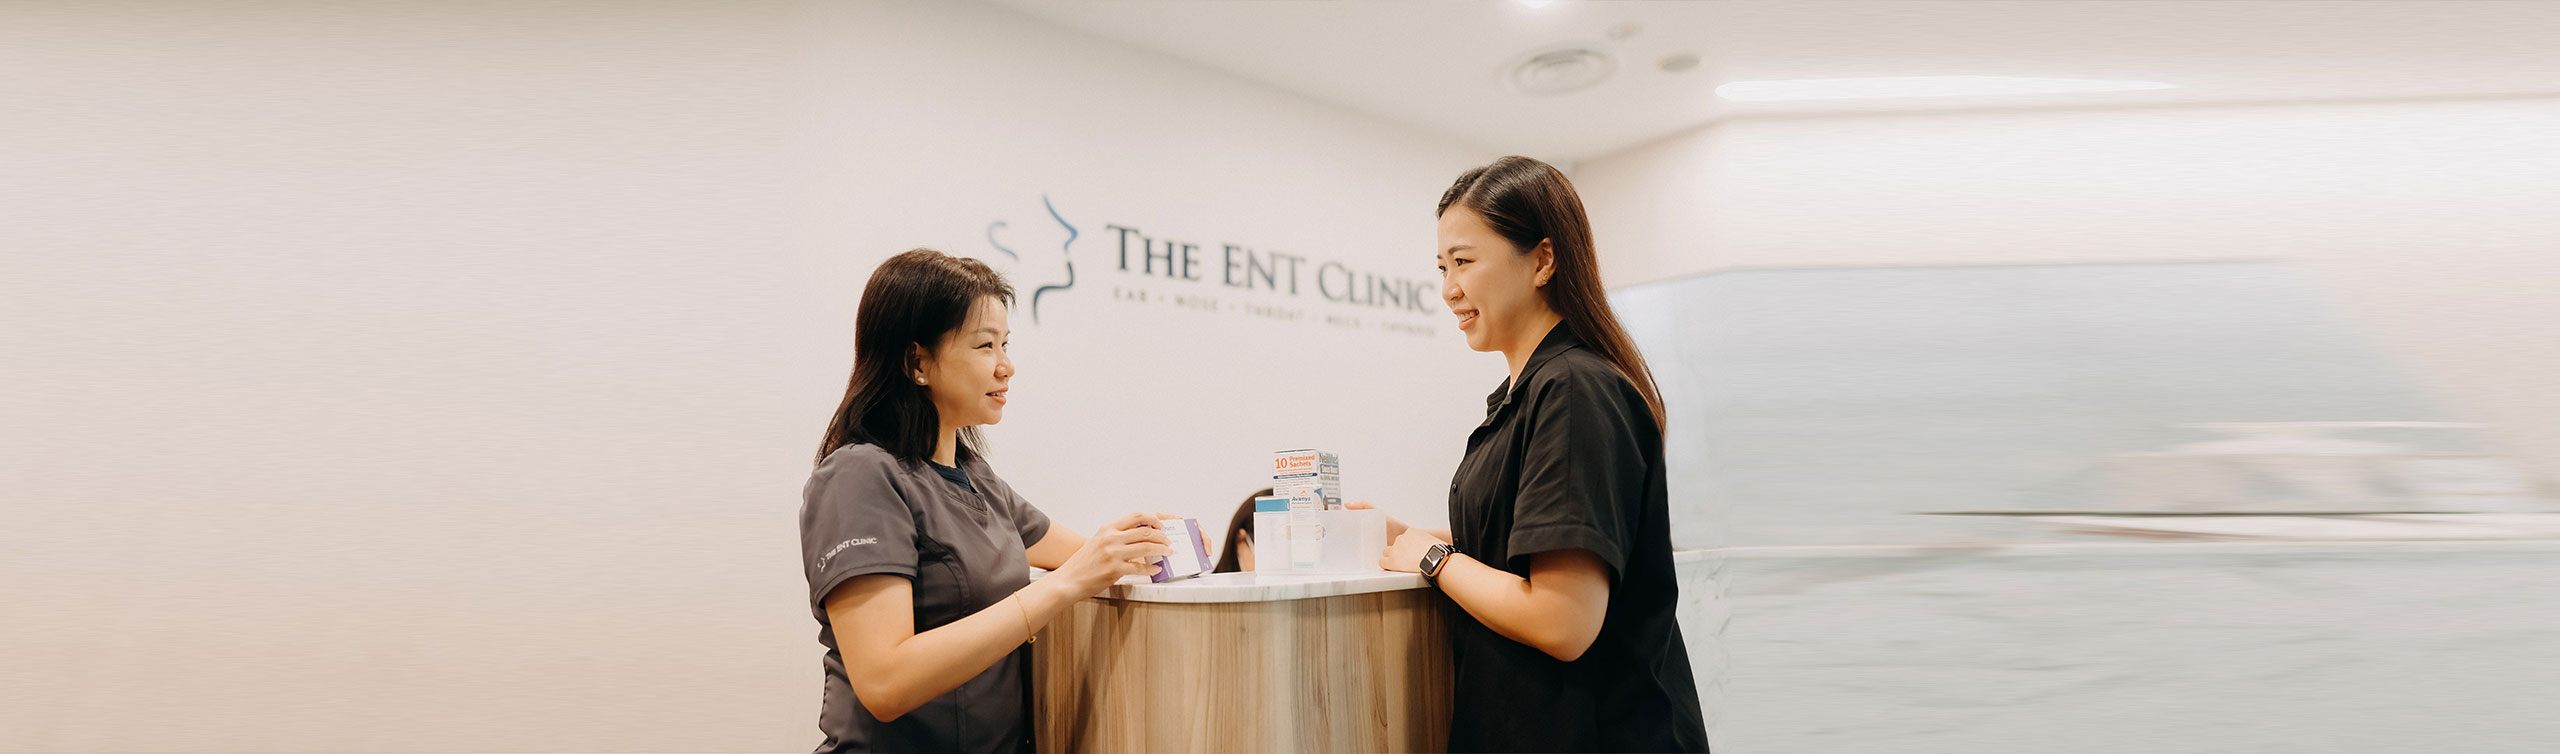 The ENT Clinic